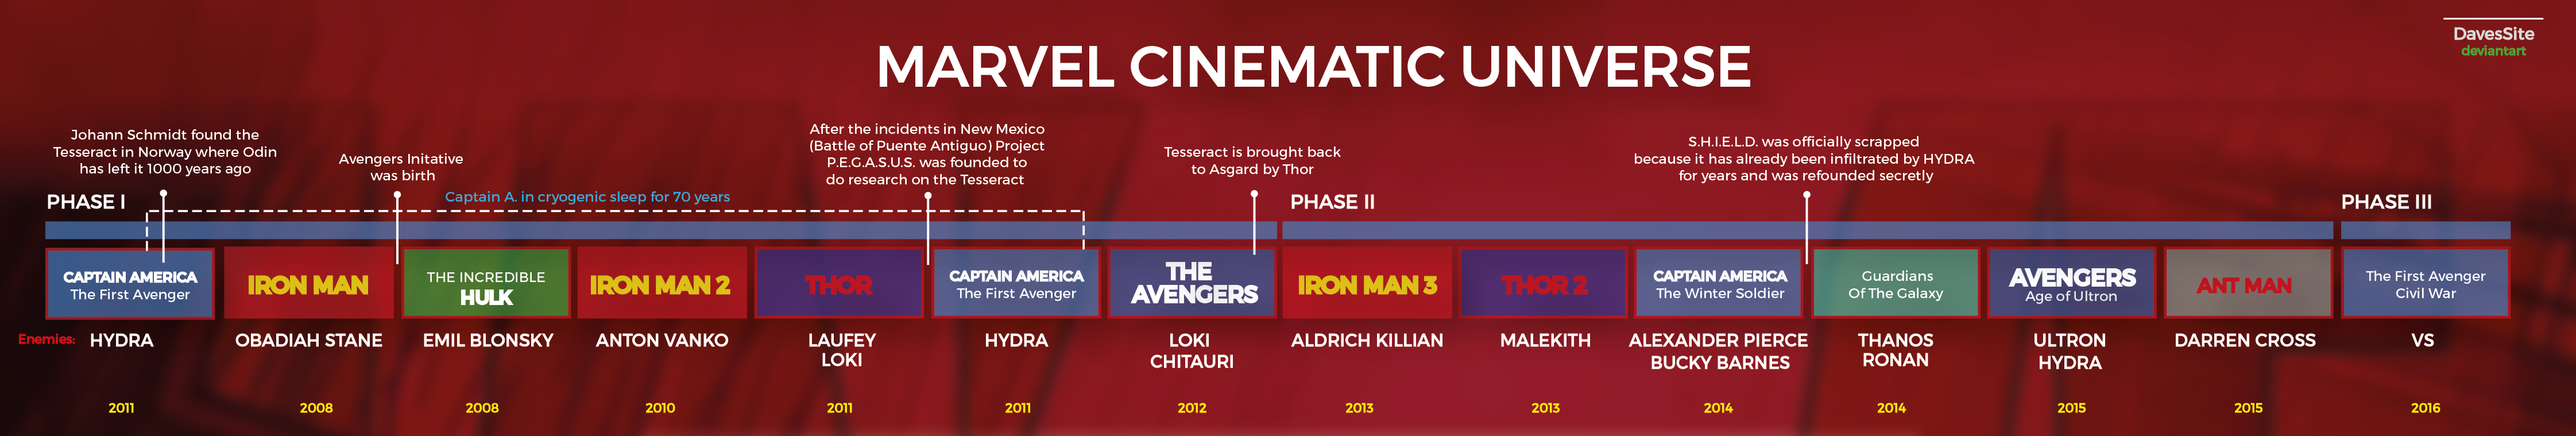 A Timeline Of The Marvel Cinematic Universe Images and Photos finder